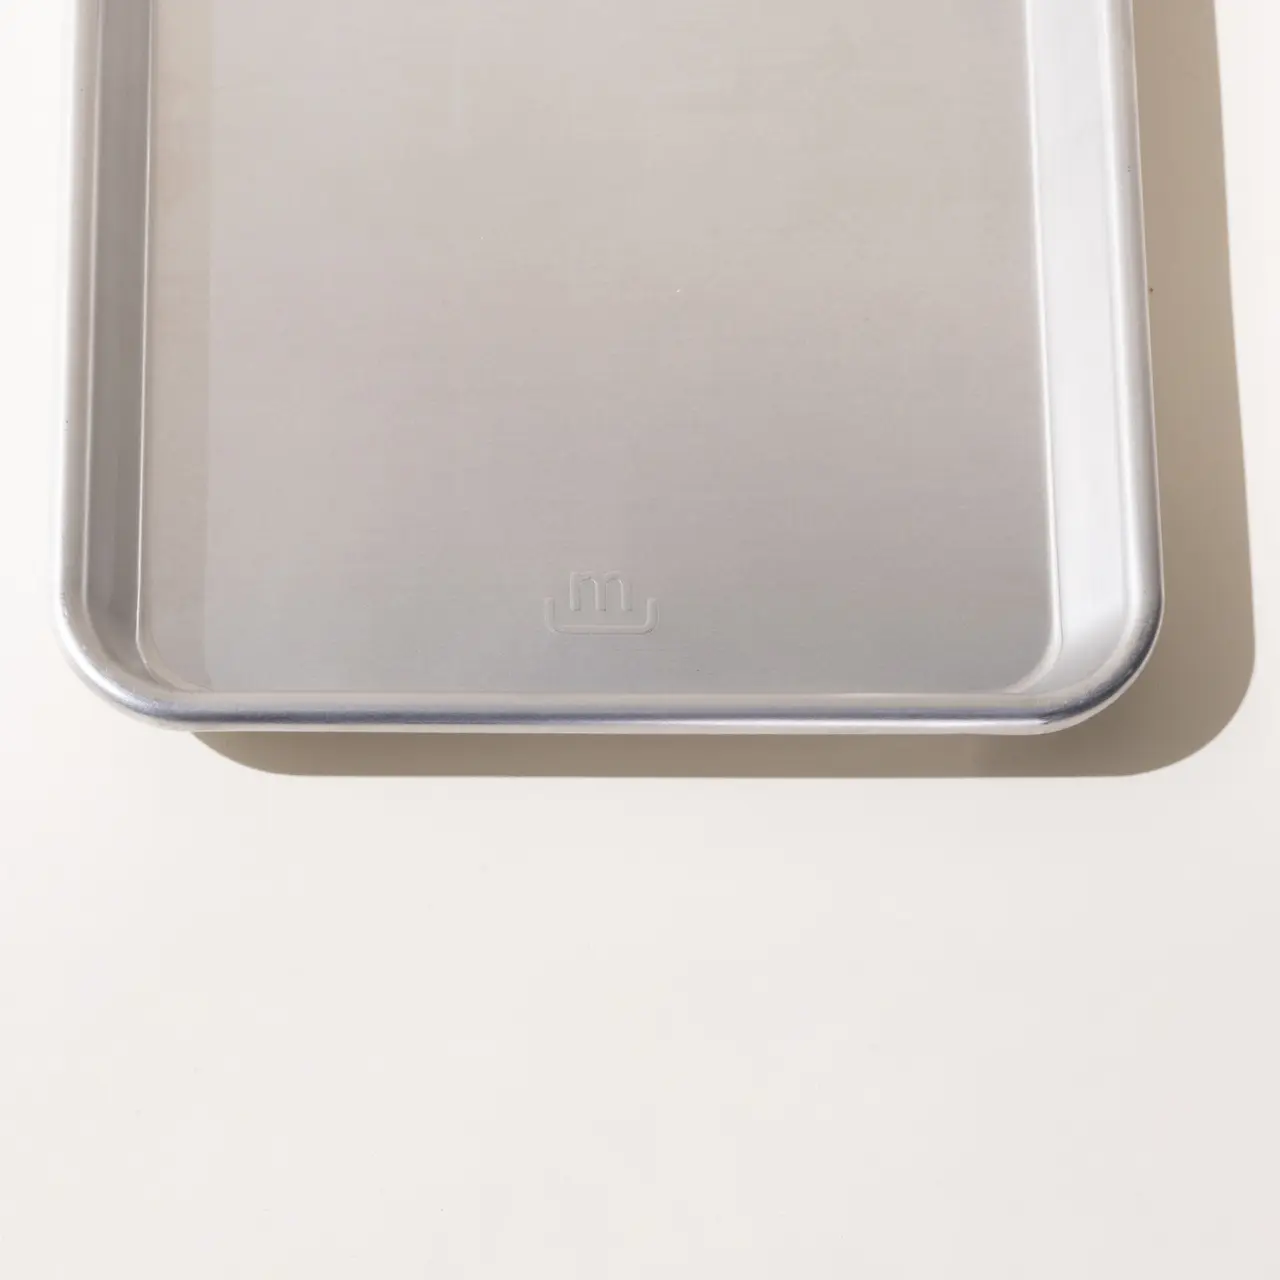 A translucent plastic lid with a frosted appearance and embossed with the letters "MU" placed on a neutral surface.